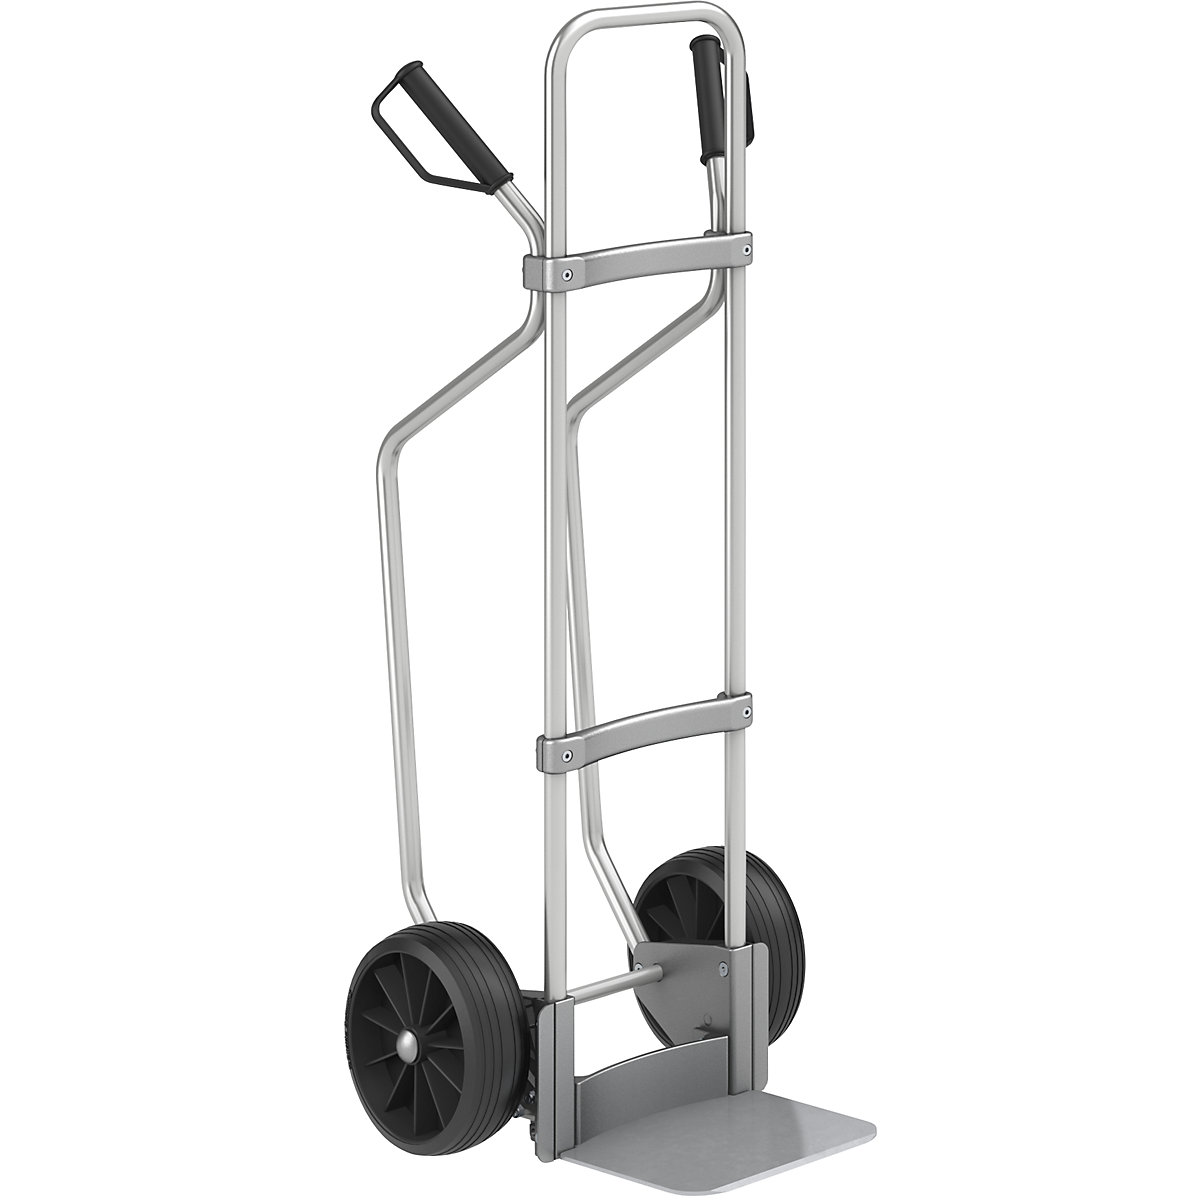 Aluminium sack truck with runners – eurokraft pro, footplate WxD 280 x 250 mm, zinc plated, solid rubber tyres-3